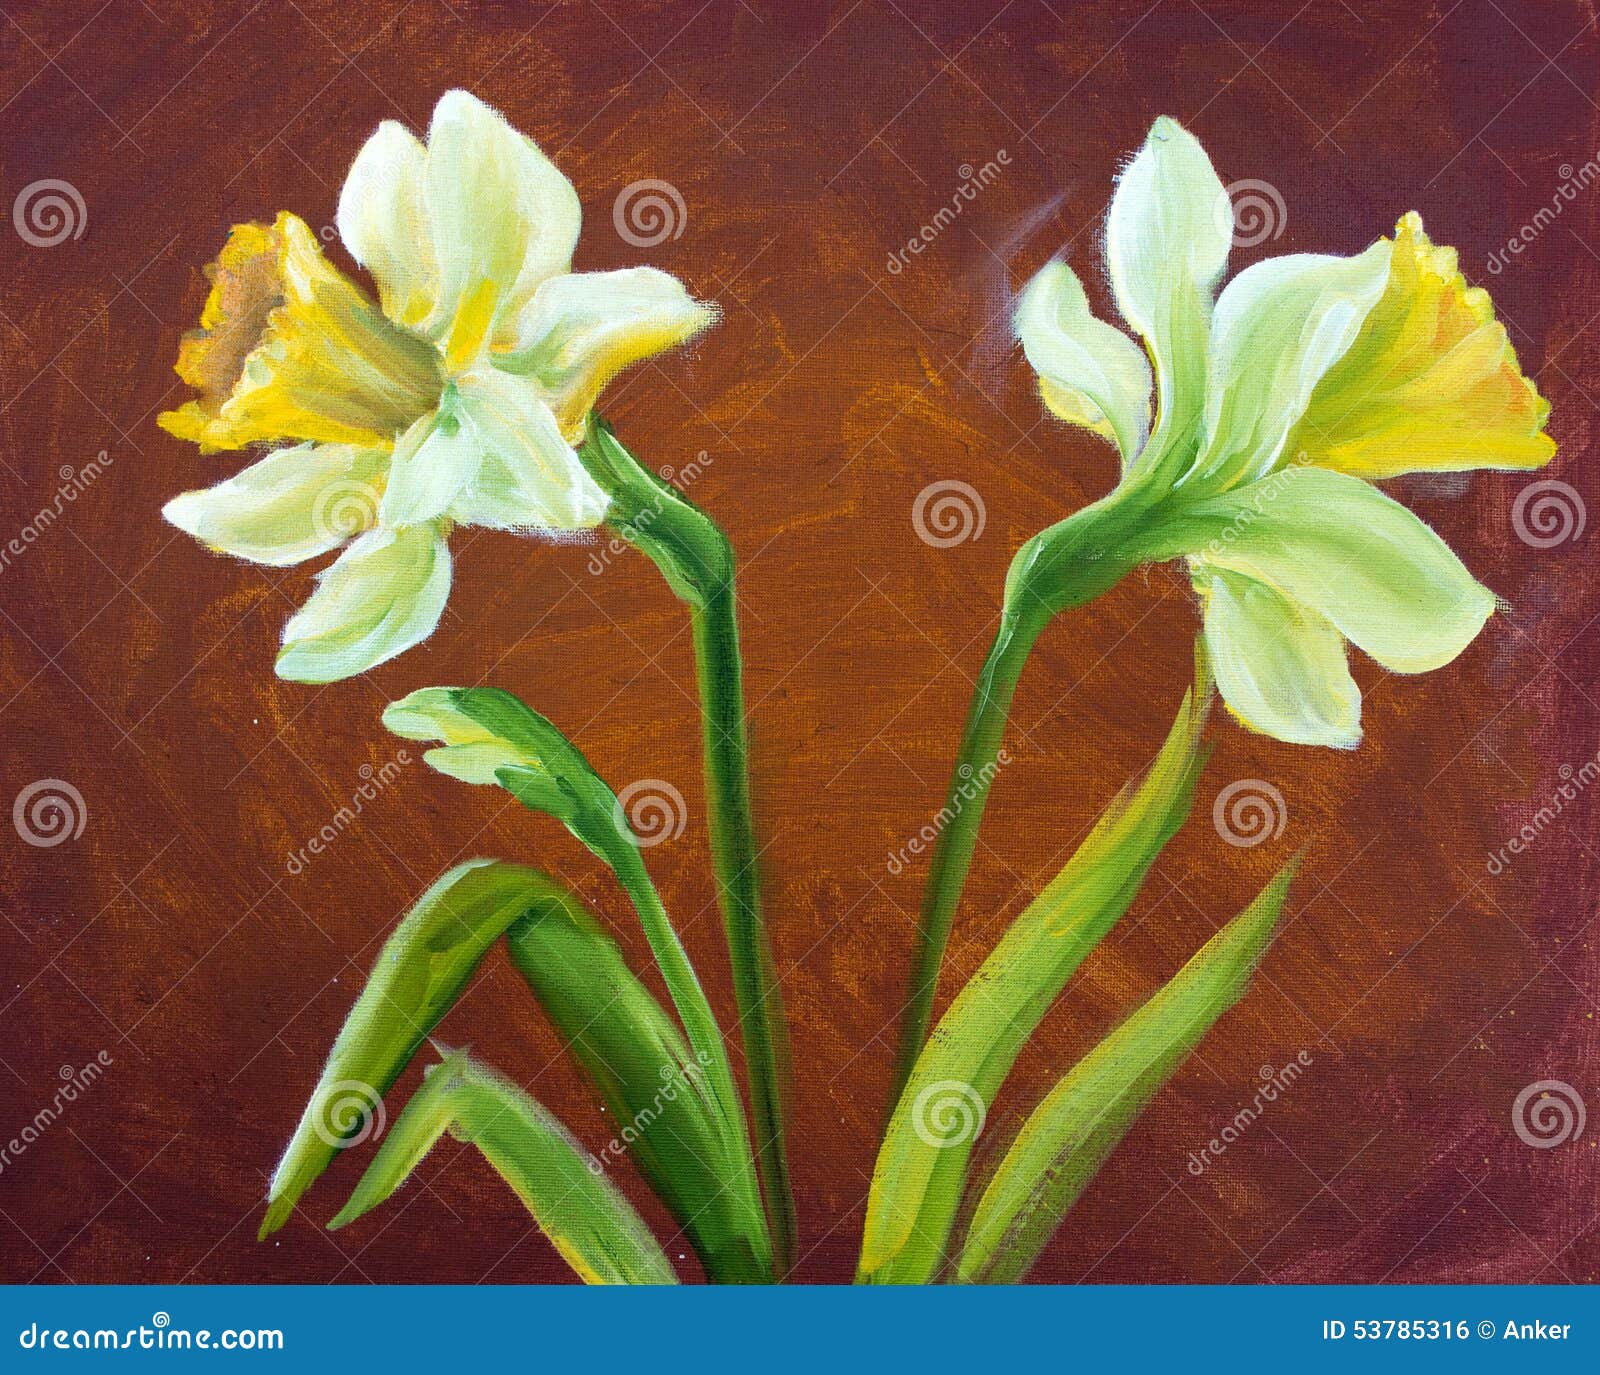 Narcissus Oil Painting. Stock Illustration  Image: 53785316